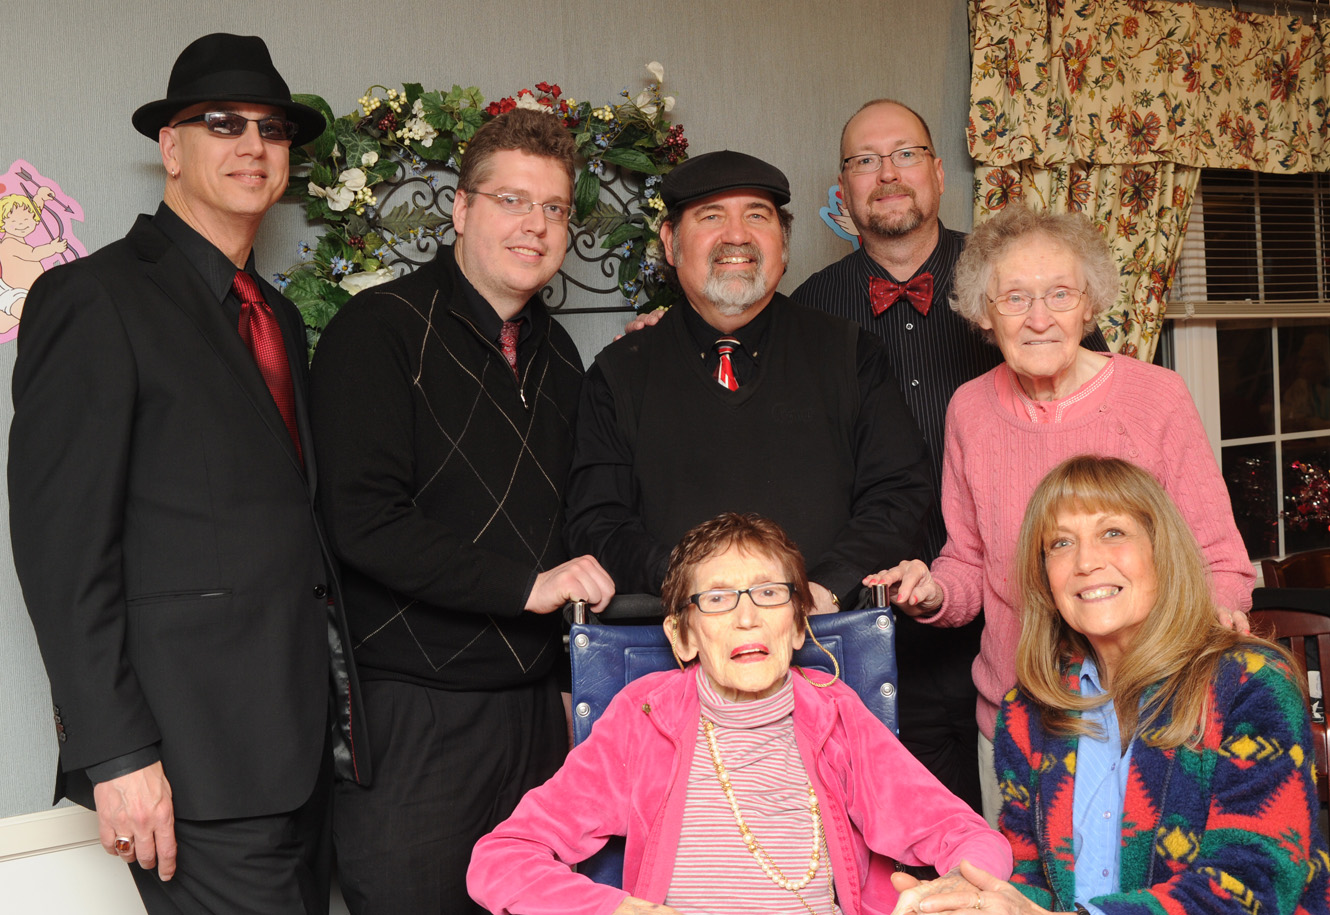 Helen Middleton and daughter with the band at Elmcroft Valentine's Party 2013
